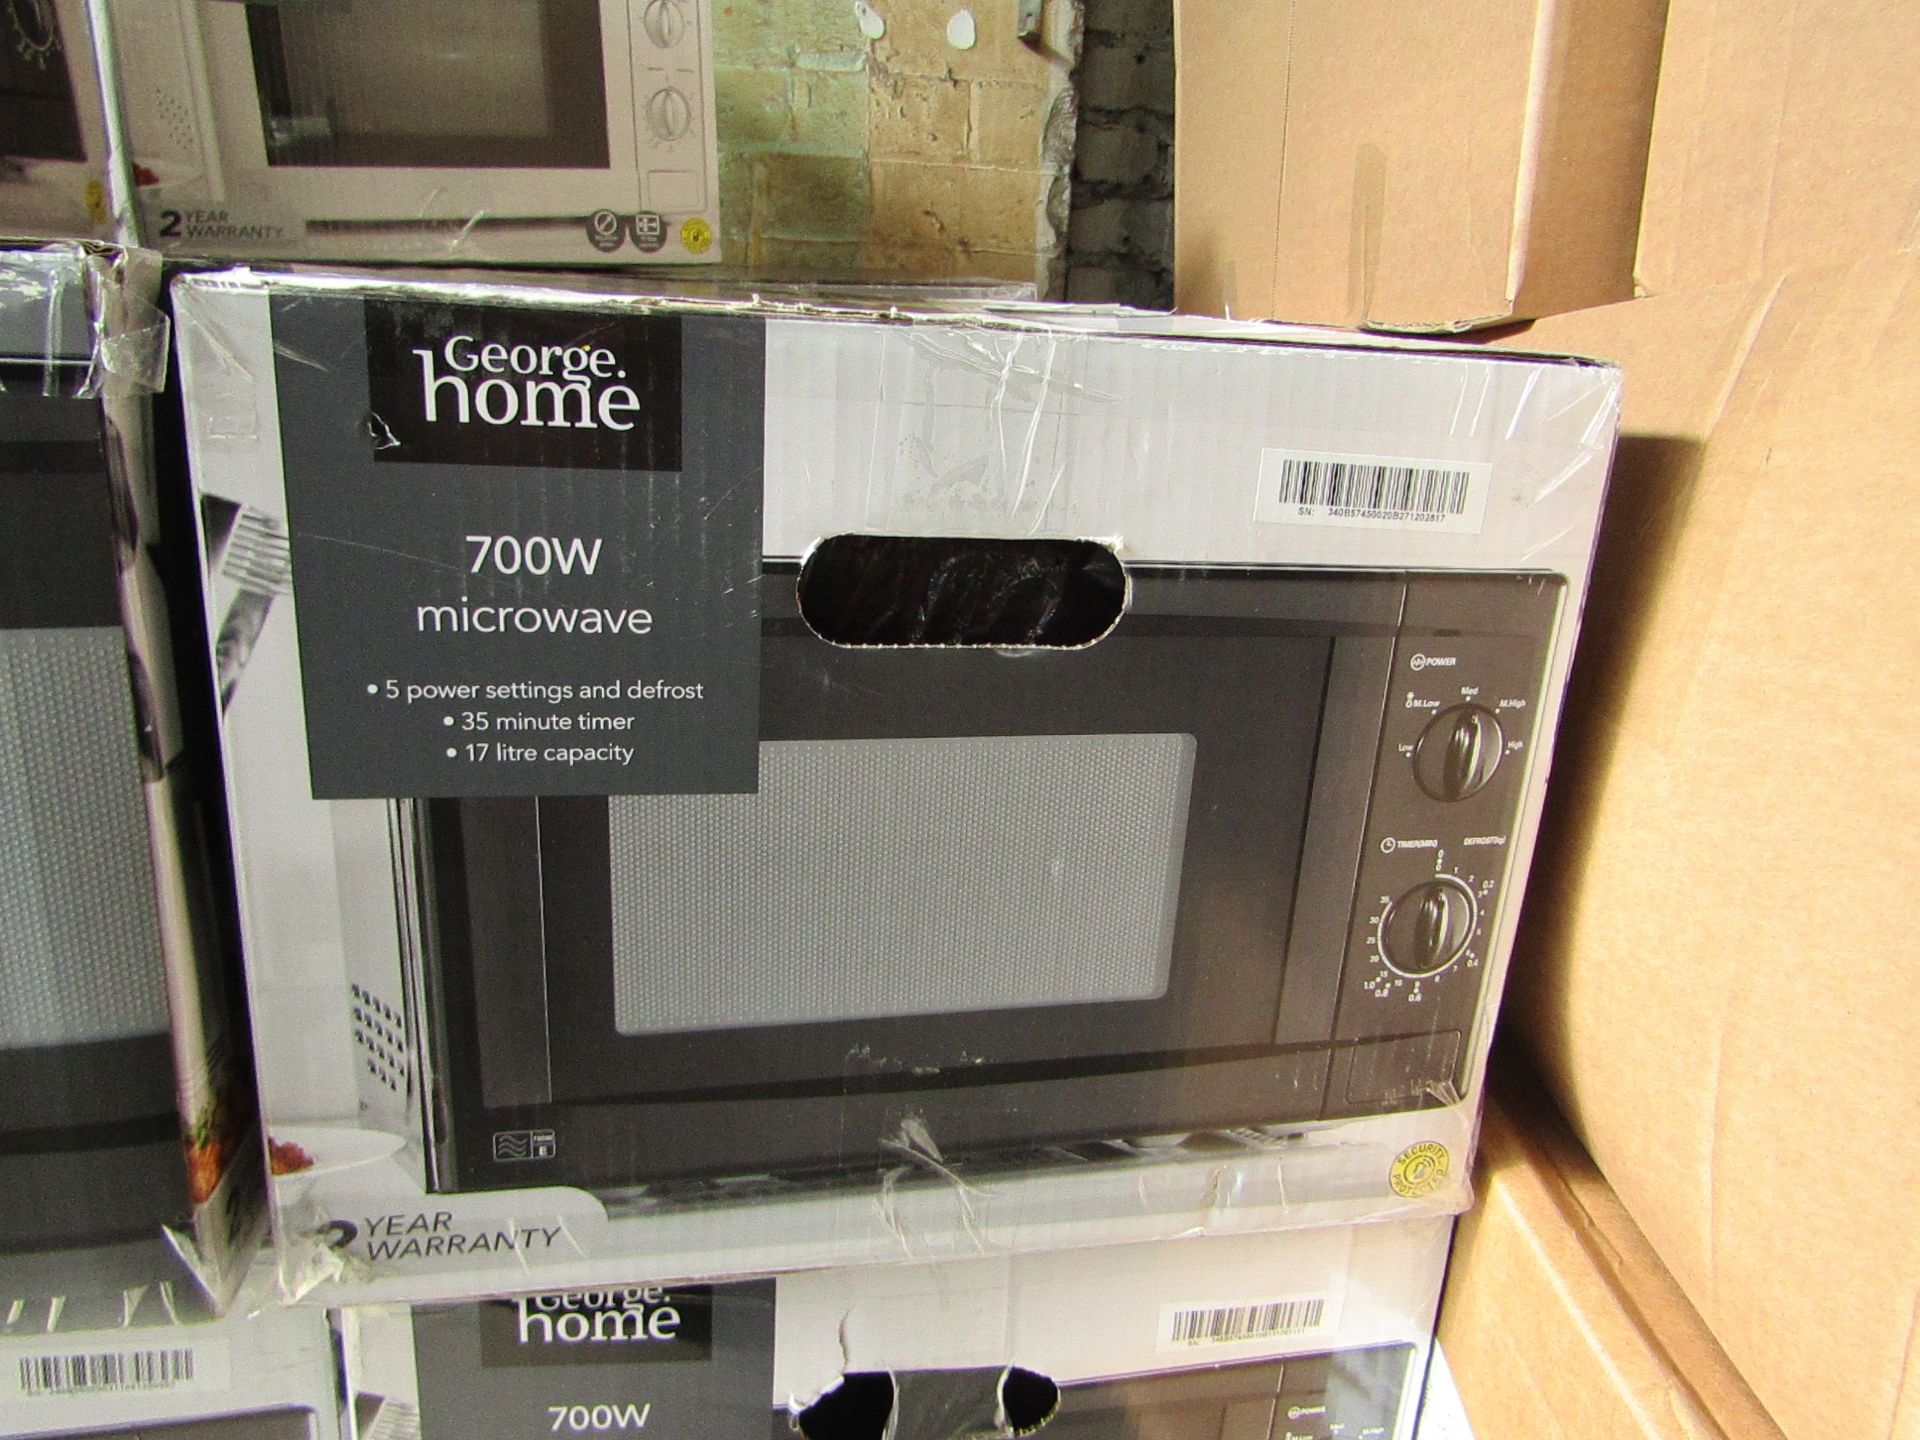 6x 700W Manual Microwave Ovens - Black - Unchecked & Boxed - RRP £40 - Total Lot RRP £240 - Load Ref